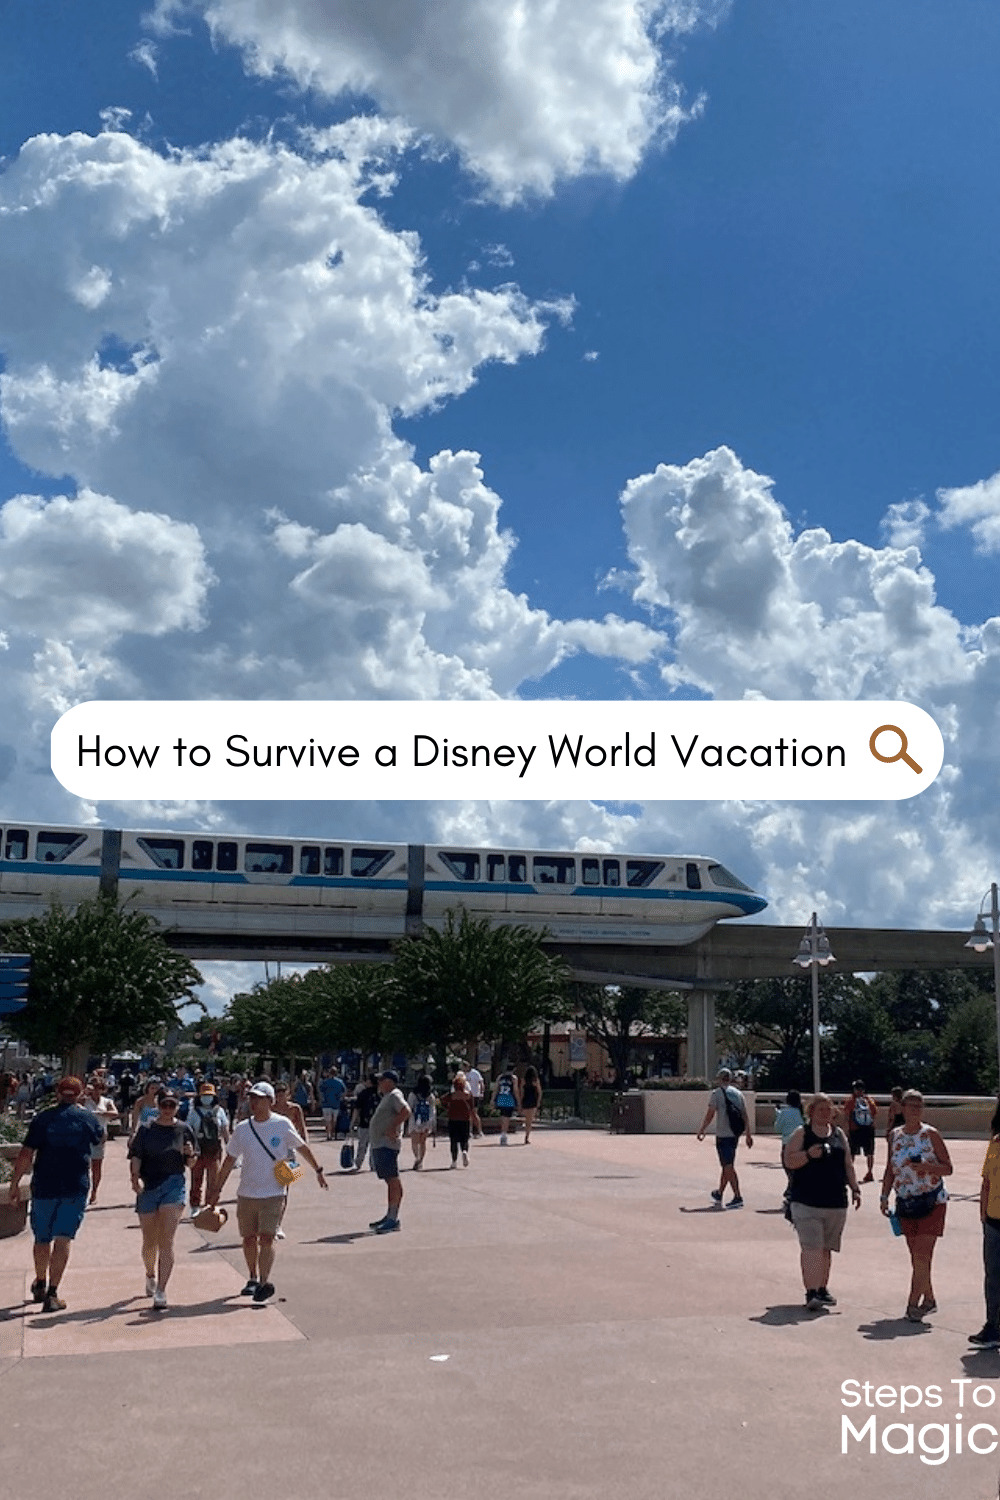 How to Physically Survive a Disney World Vacation